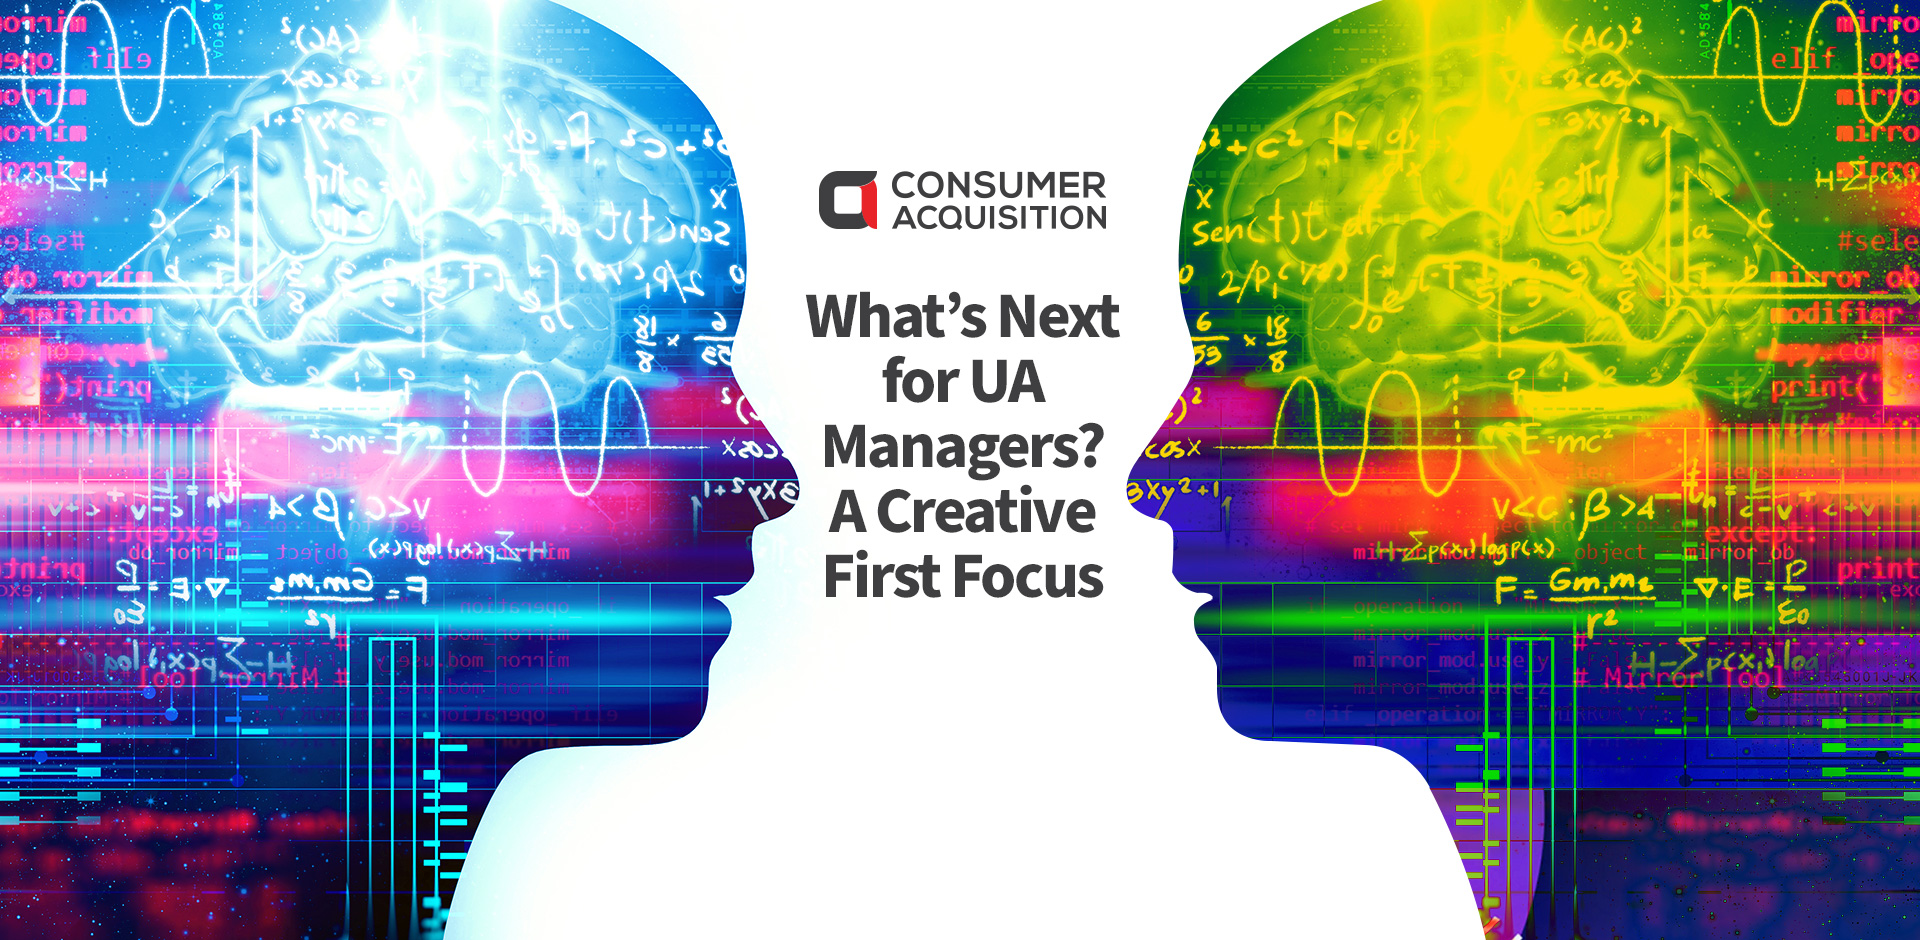 What’s Next for UA Managers? A Creative-First Focus.